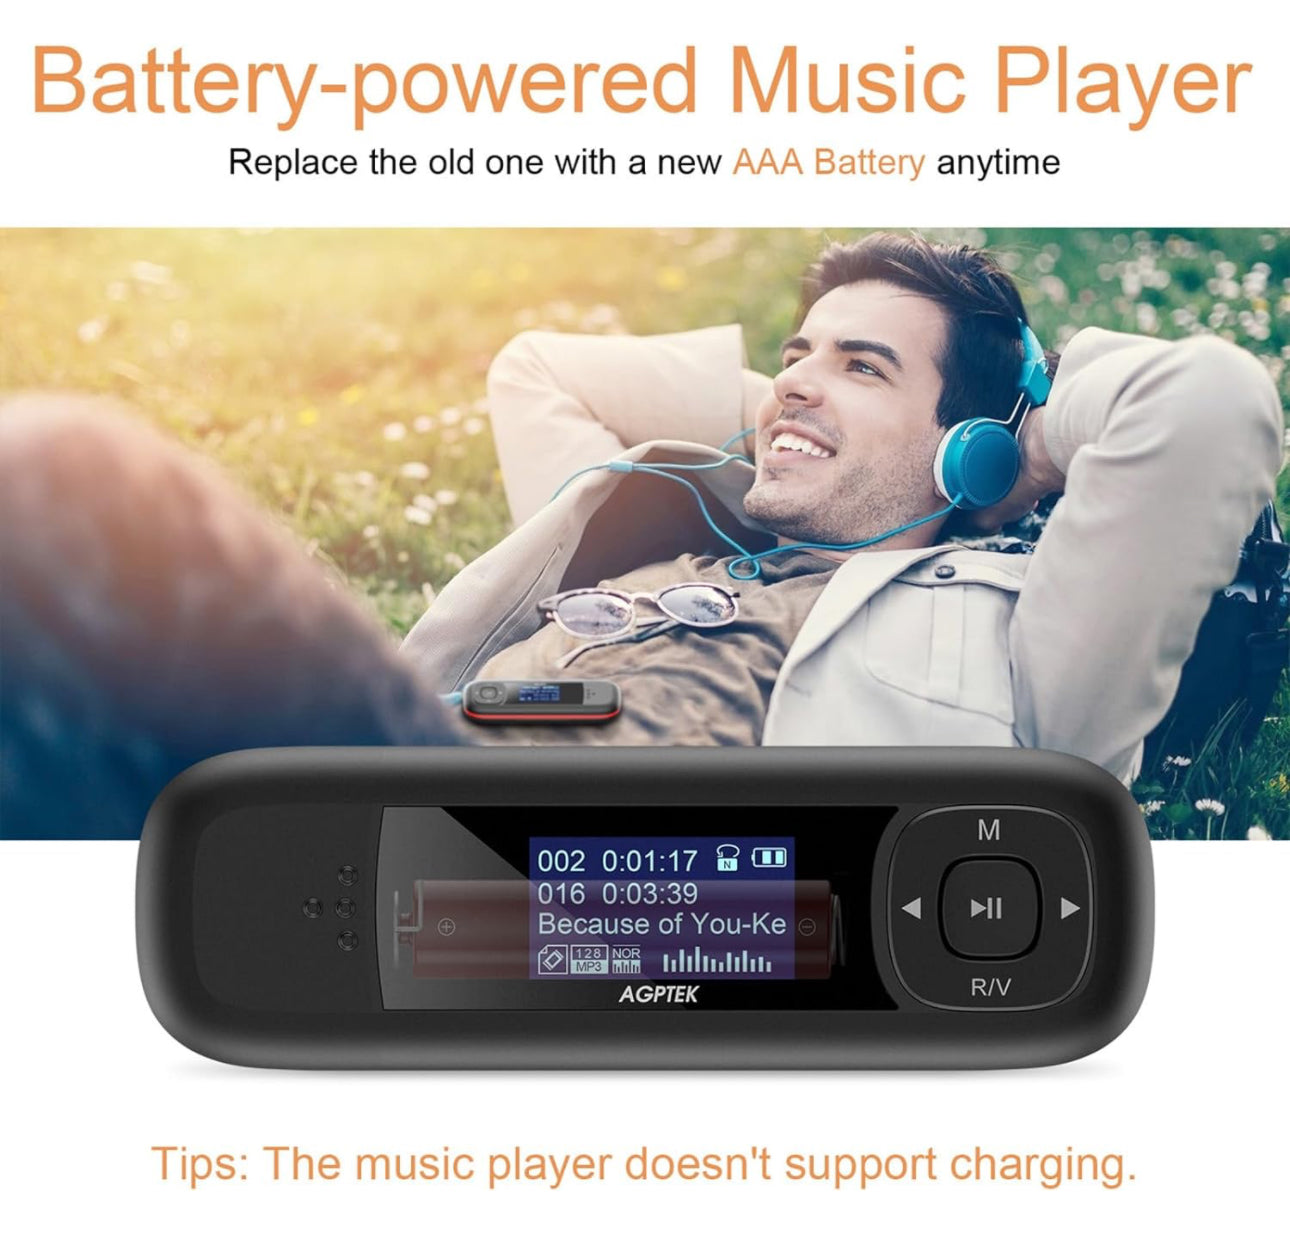 AGPTEK U3 USB Stick Mp3 Player, 8GB Music Player Supports Replaceable AAA Battery, Recording, FM Radio, Expandable Up to 128GB, Black